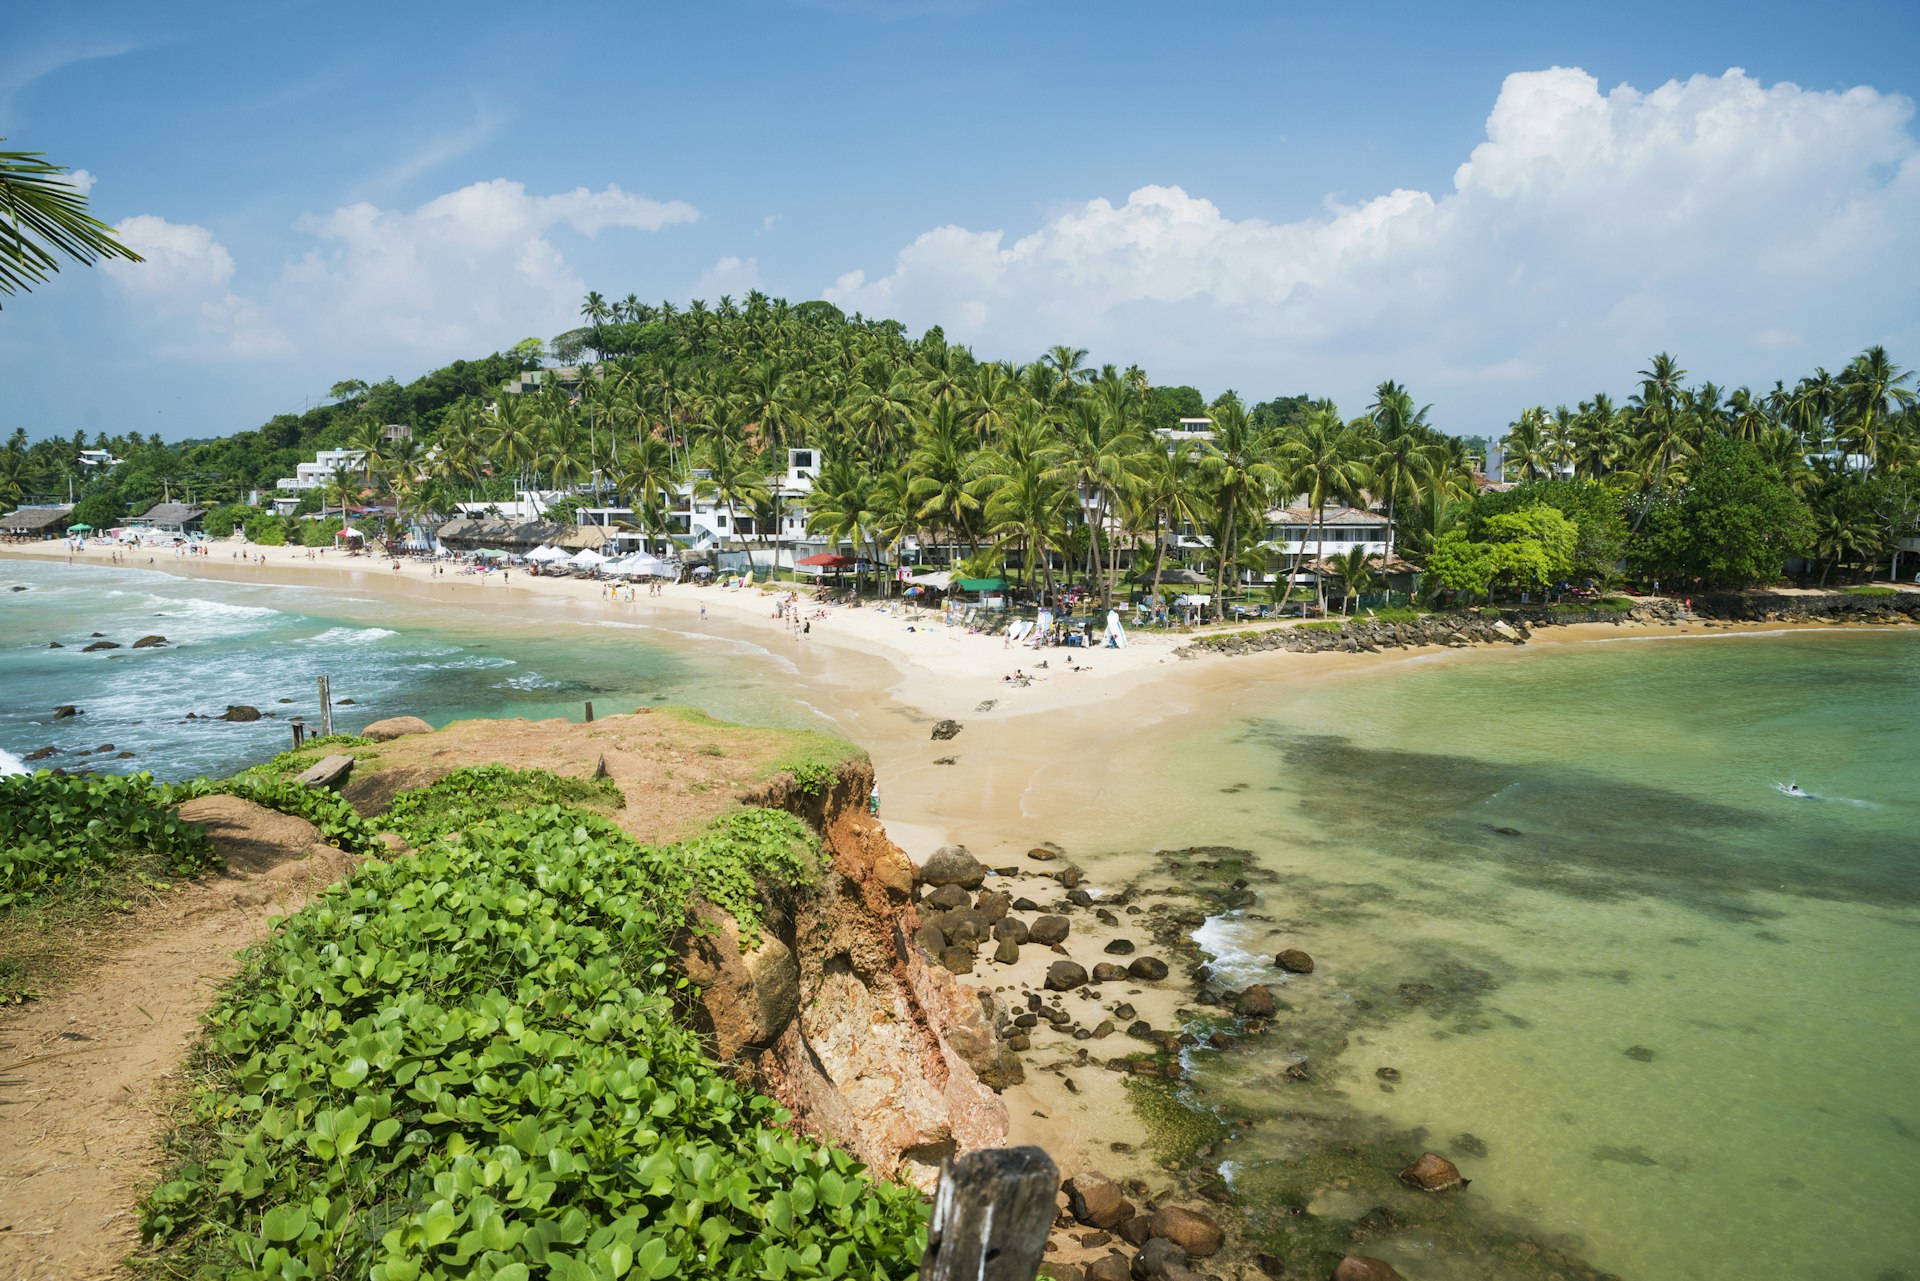 A view of the small beach resort of Mirissa on the south coast of Sri Lanka. The sandy, white beach curves out to a small islet, and is backed by palm trees.